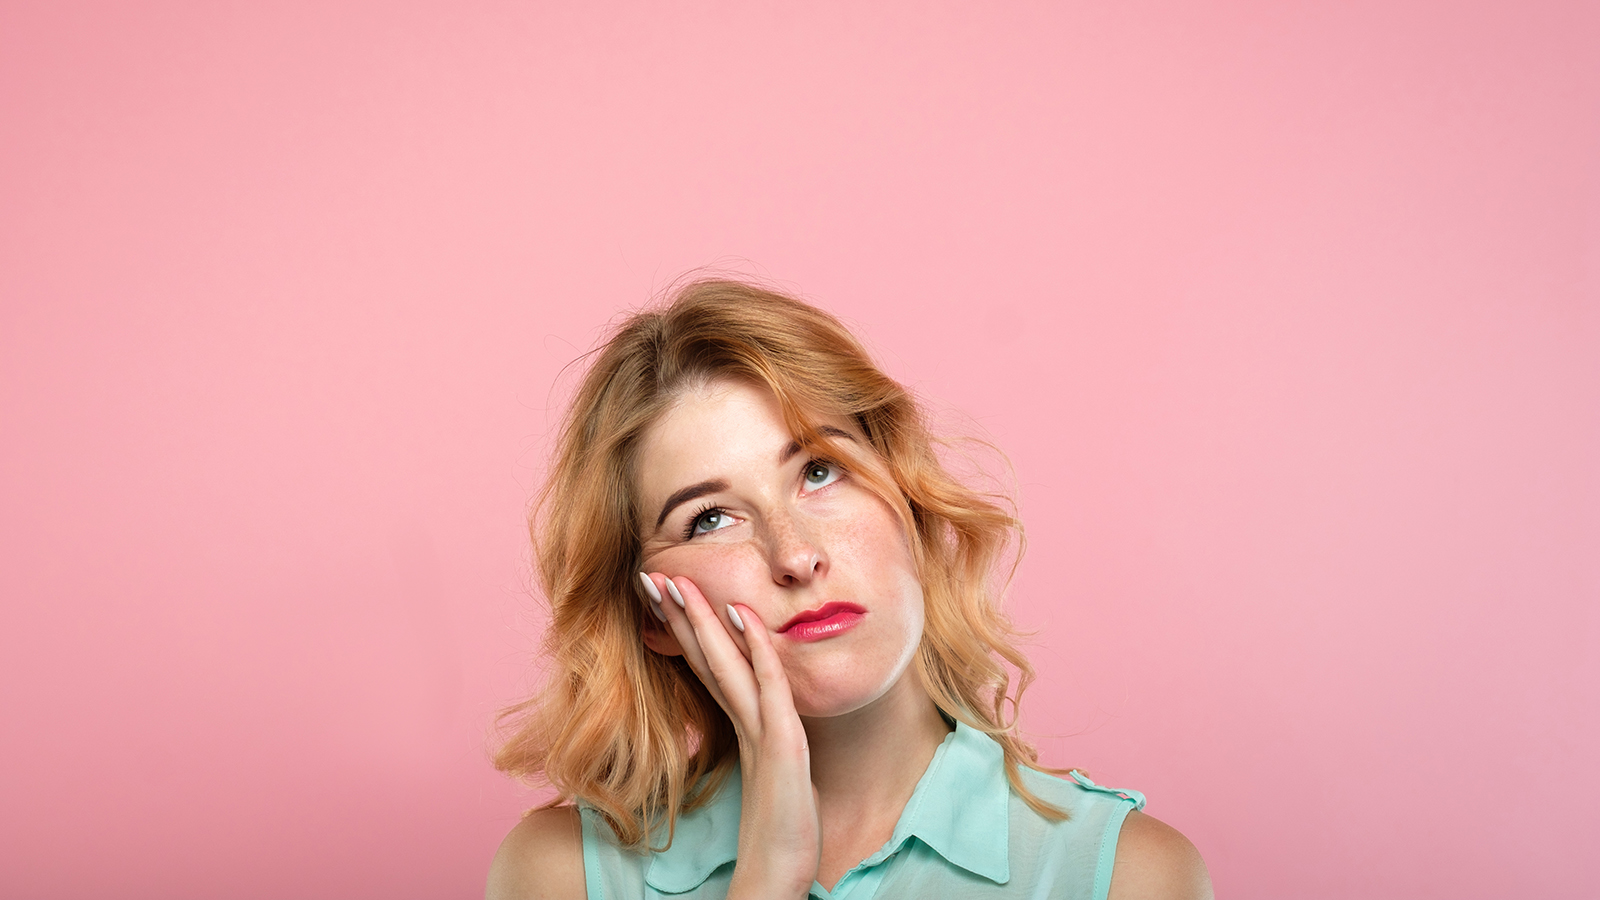 facial expression. low mood and emotion. bored unimpressed disinterested woman looking up. young beautiful blond girl portrait on pink background.